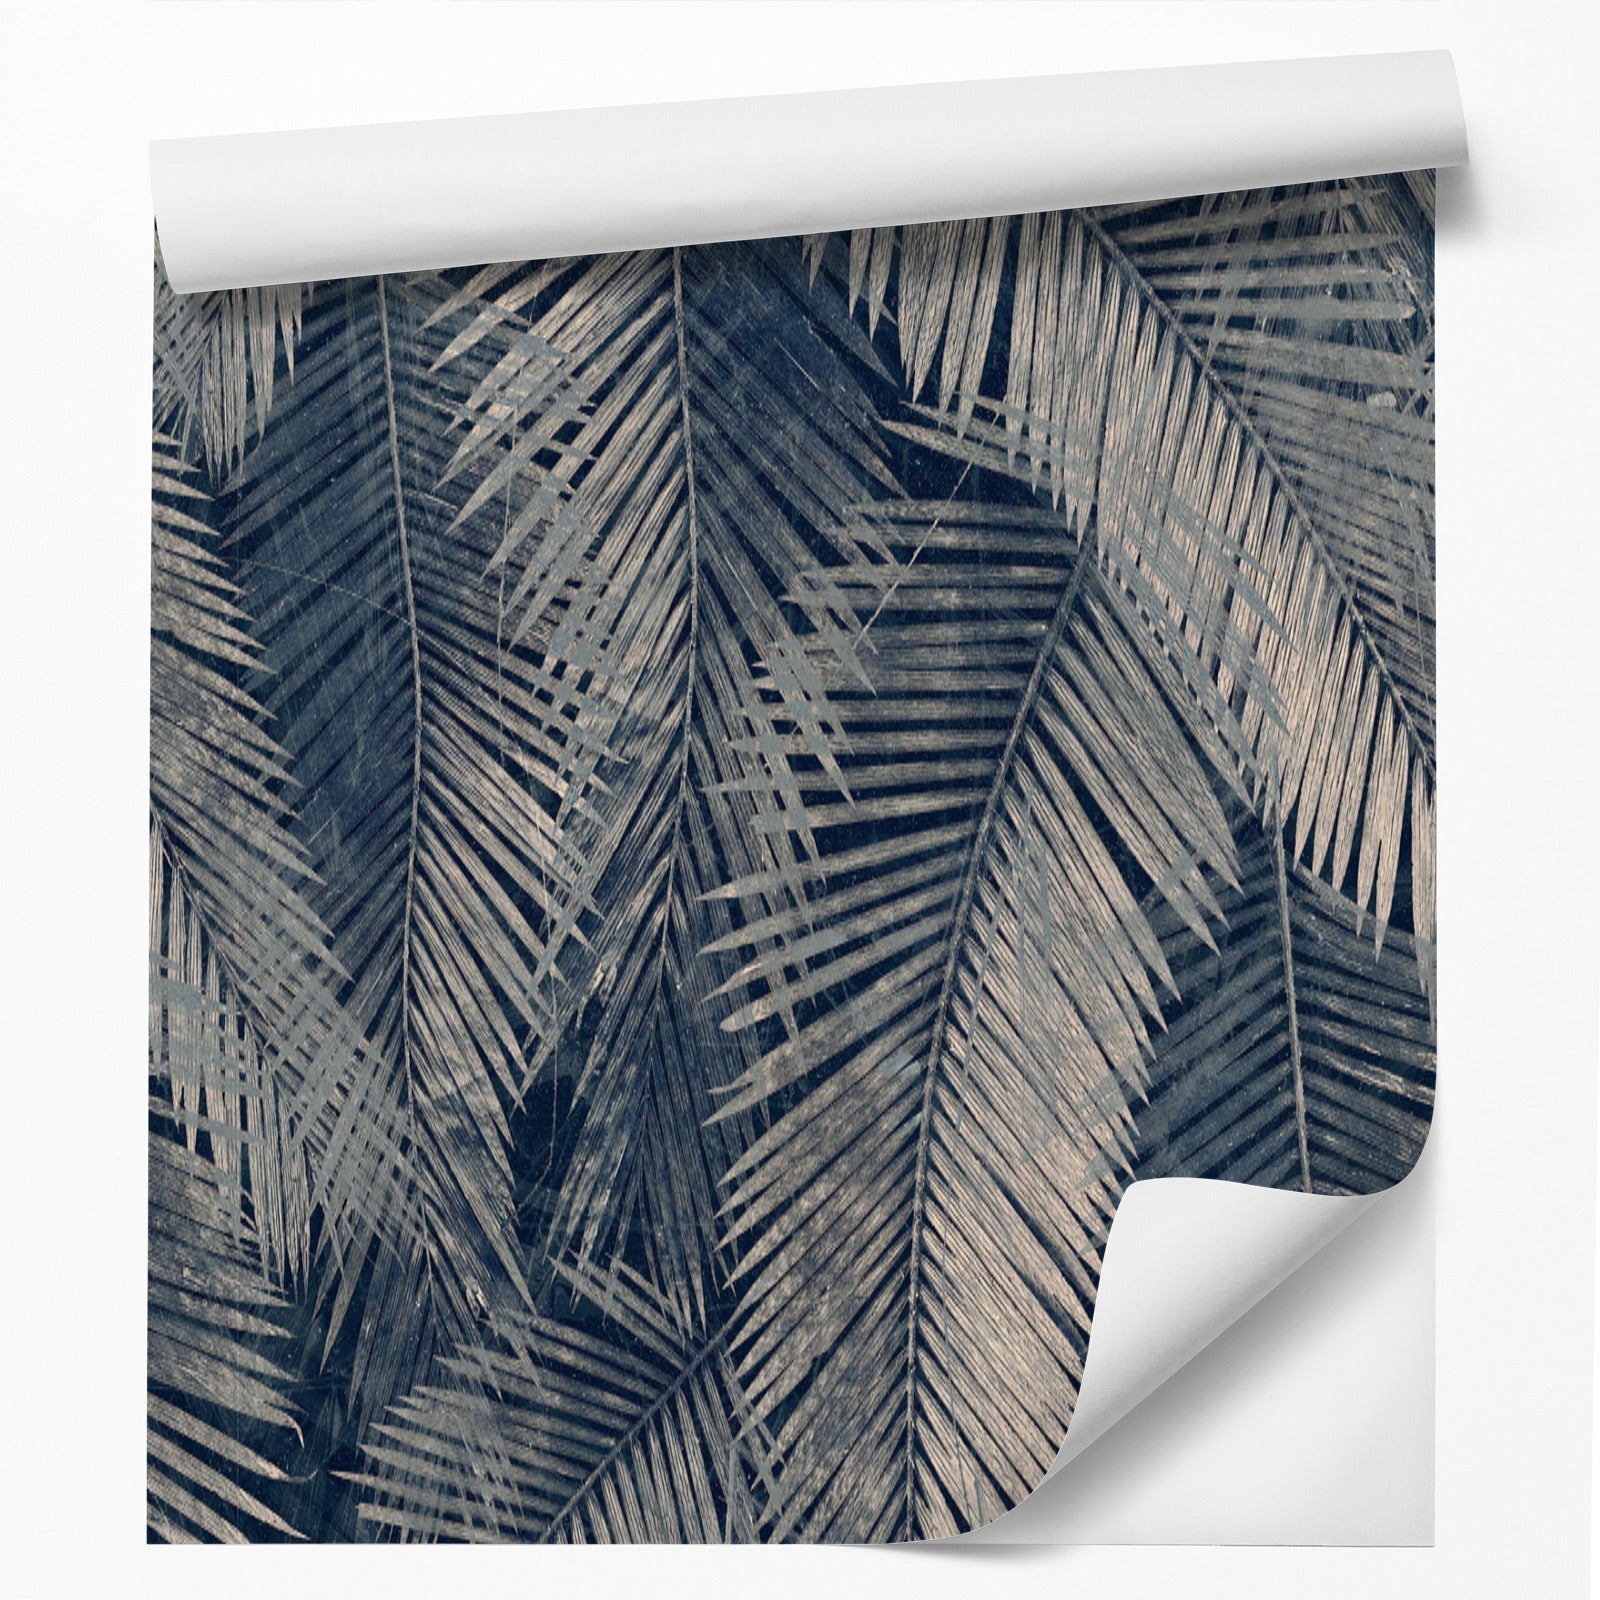 Tropical Peel And Stick Removable Wallpaper  200 Colors Choices